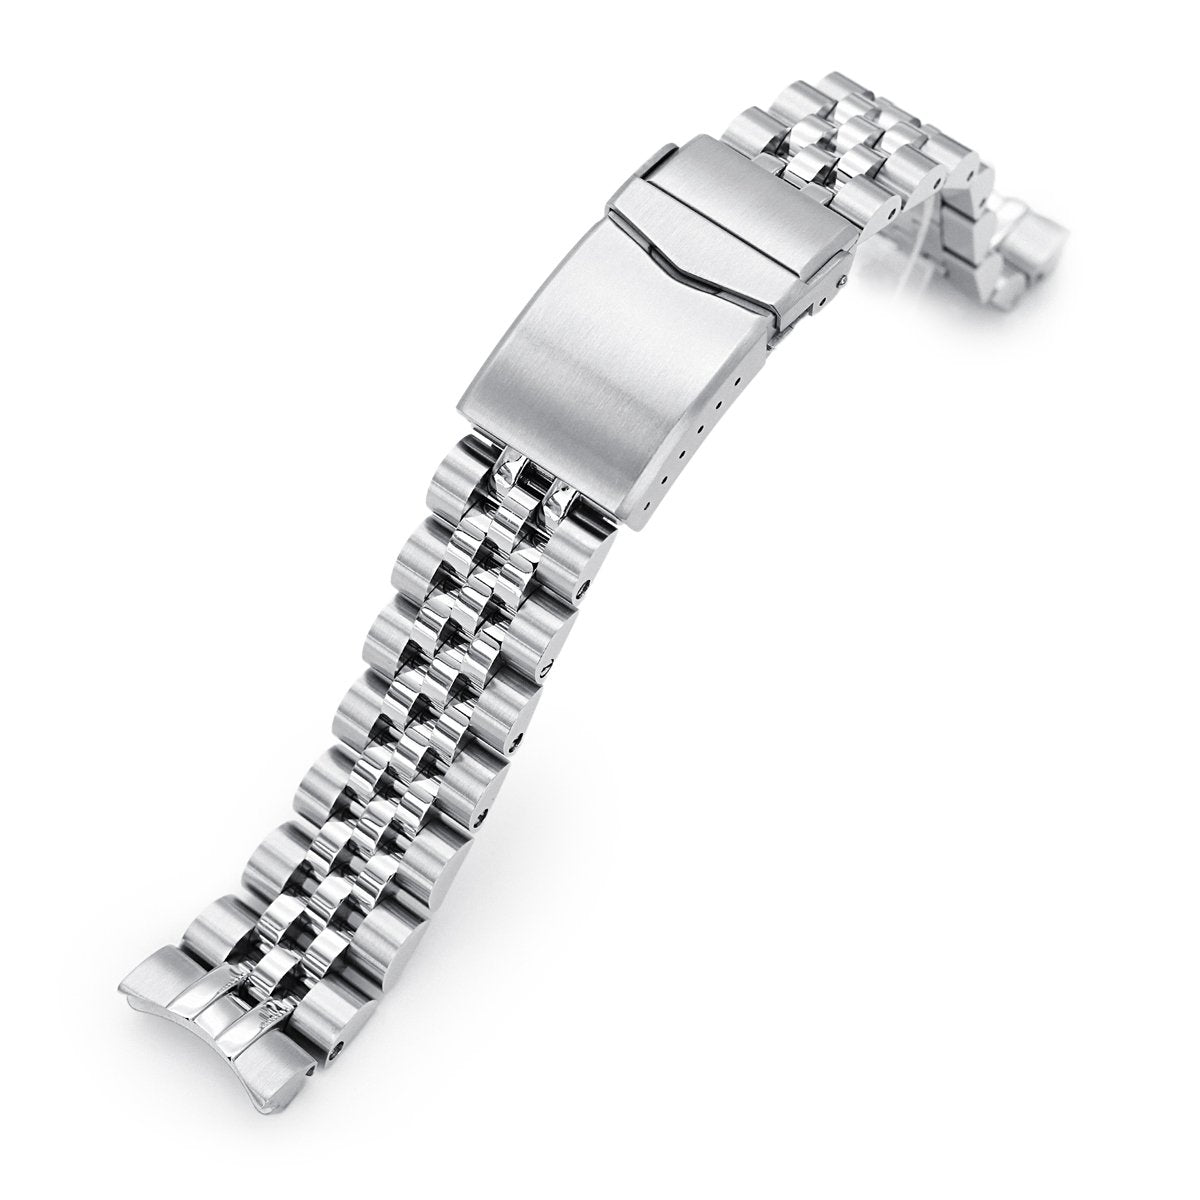 20mm Angus-J Louis 316L Stainless Steel Watch Bracelet for Seiko Mini Turtles SRPC35 Brushed V-Clasp Strapcode Watch Bands